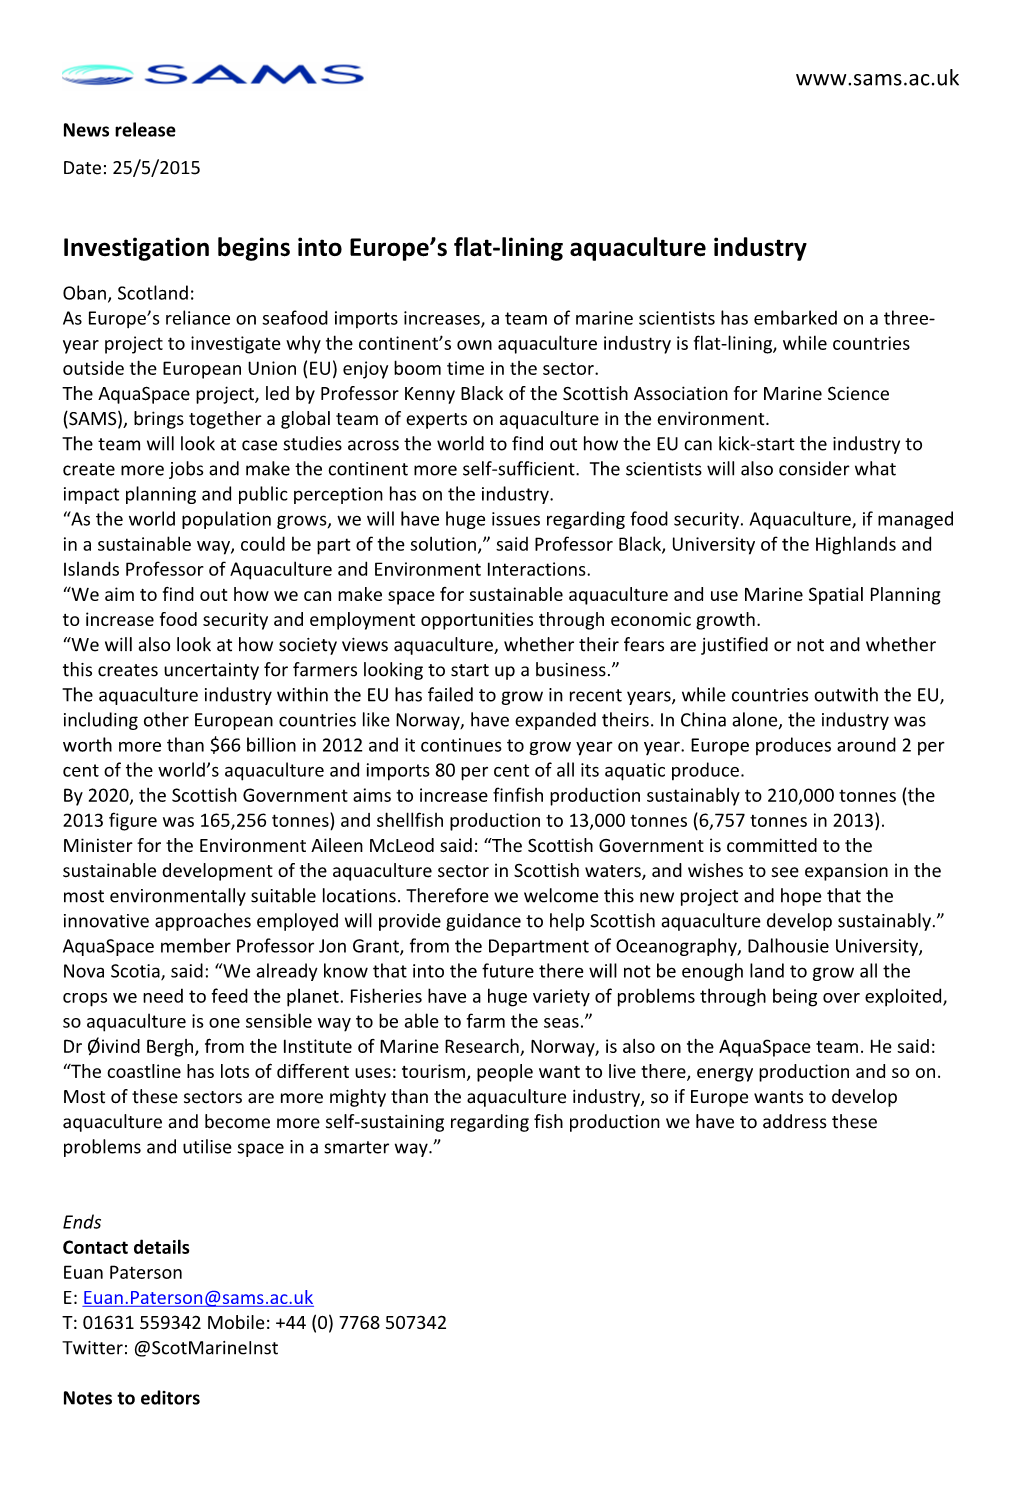 Investigation Begins Into Europe S Flat-Lining Aquaculture Industry